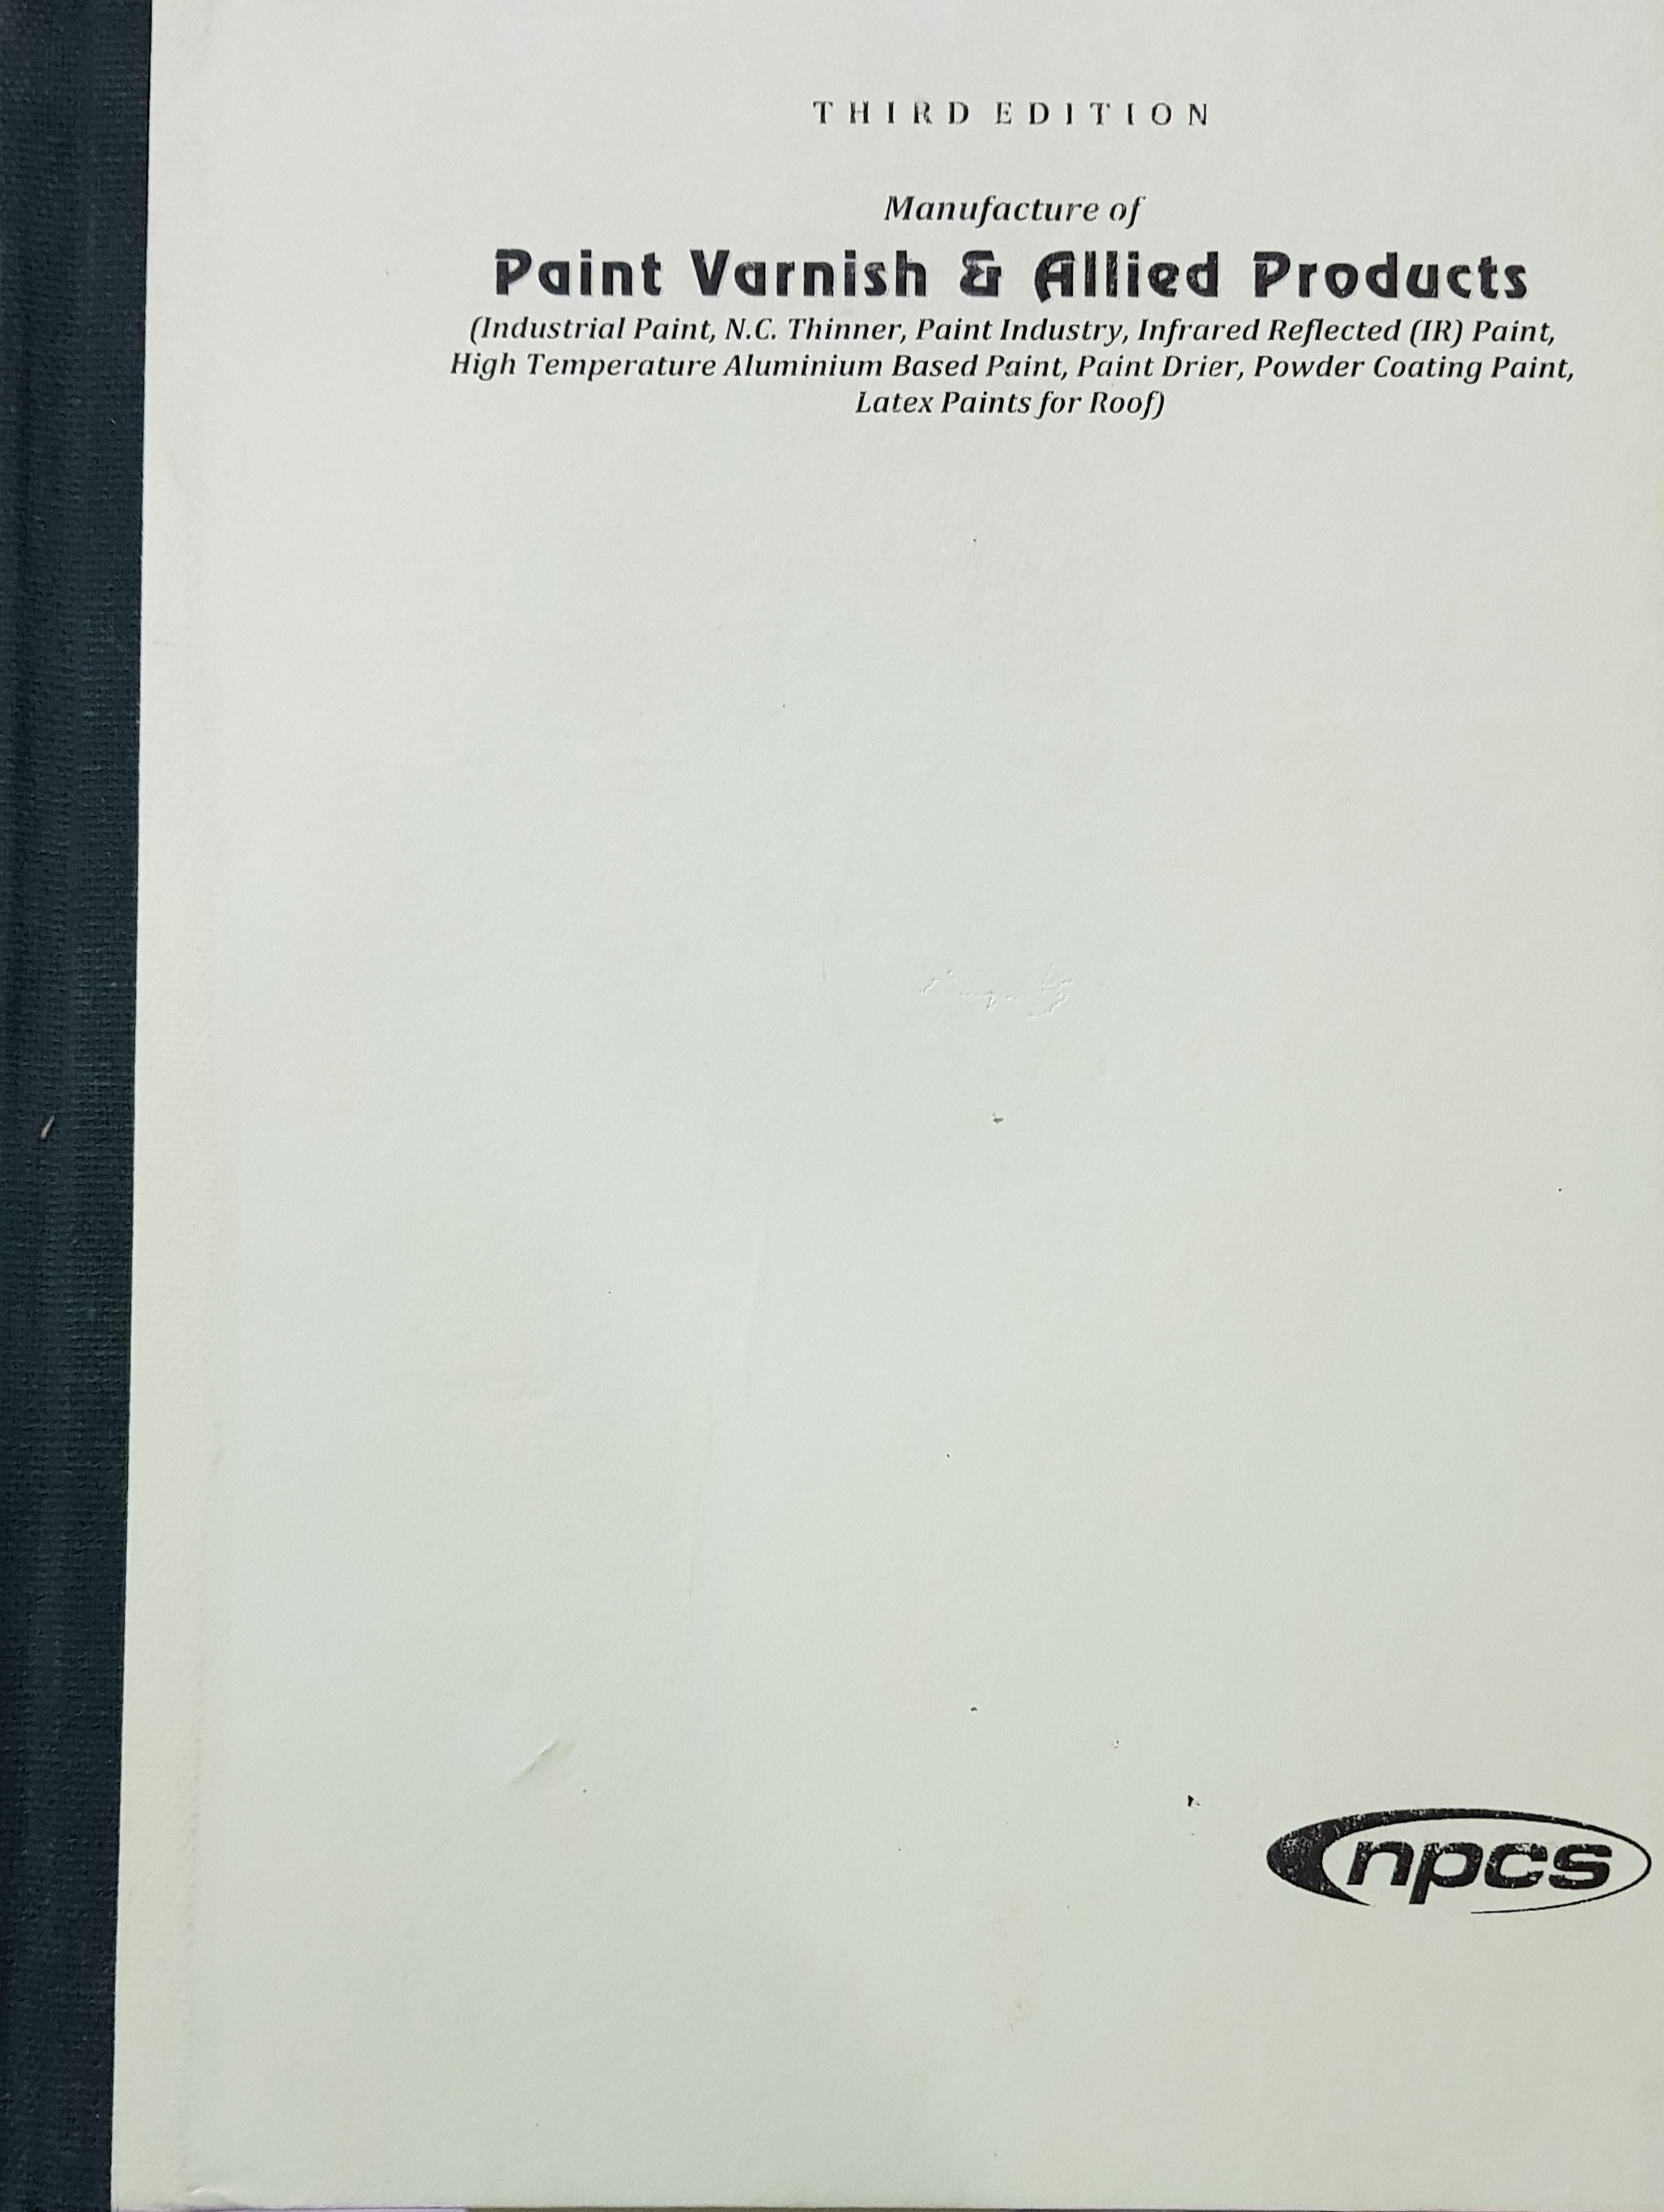 Manufacture of Paint, Varnish & Allied Products (3rd Revised Edition)#